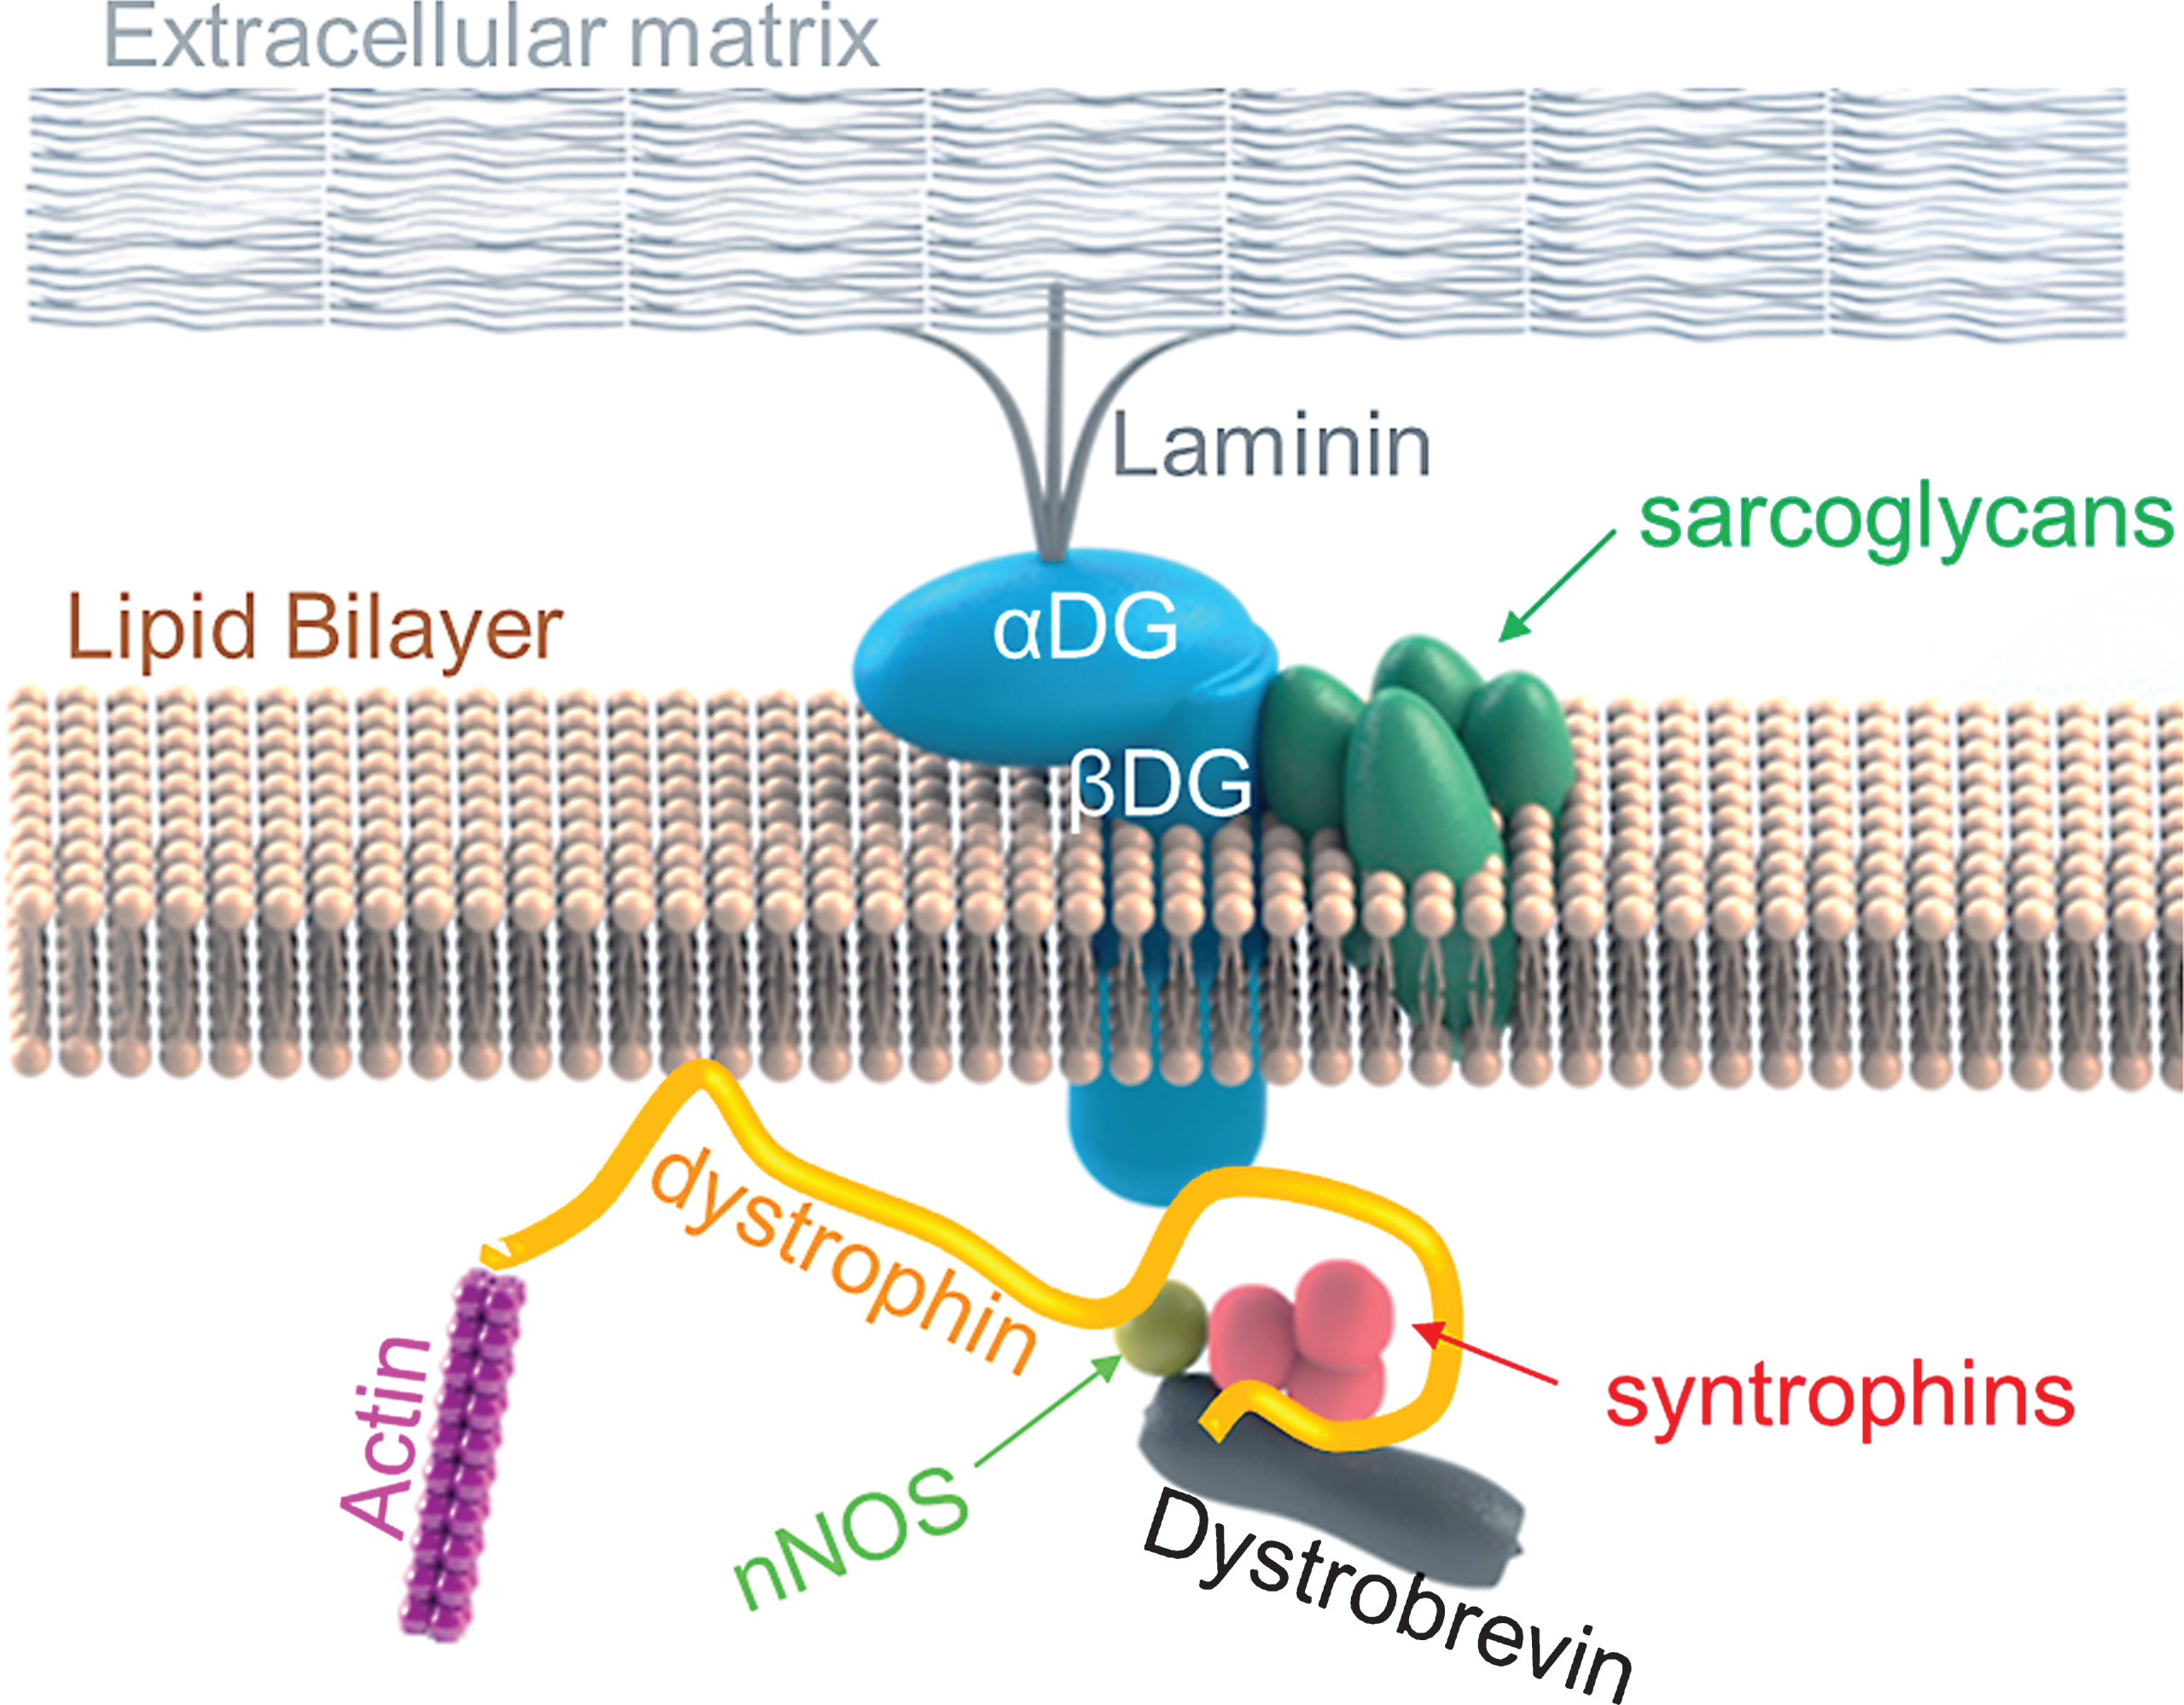 Dystrophin links actin cytoskeleton to the dystrophin glycoprotein complex. In normal muscles, the N-terminal domain of dystrophin binds to actin. Dystrophin then, subsequently interacts with the components of DGC: It interact with neuronal nitric oxide synthase (nNOS) at the region between exon 42 to exon 45, then, its cysteine rich domain binds to β-dystroglycan, and lastly, its C-terminal domain binds to syntrophin and dystrobrevin.